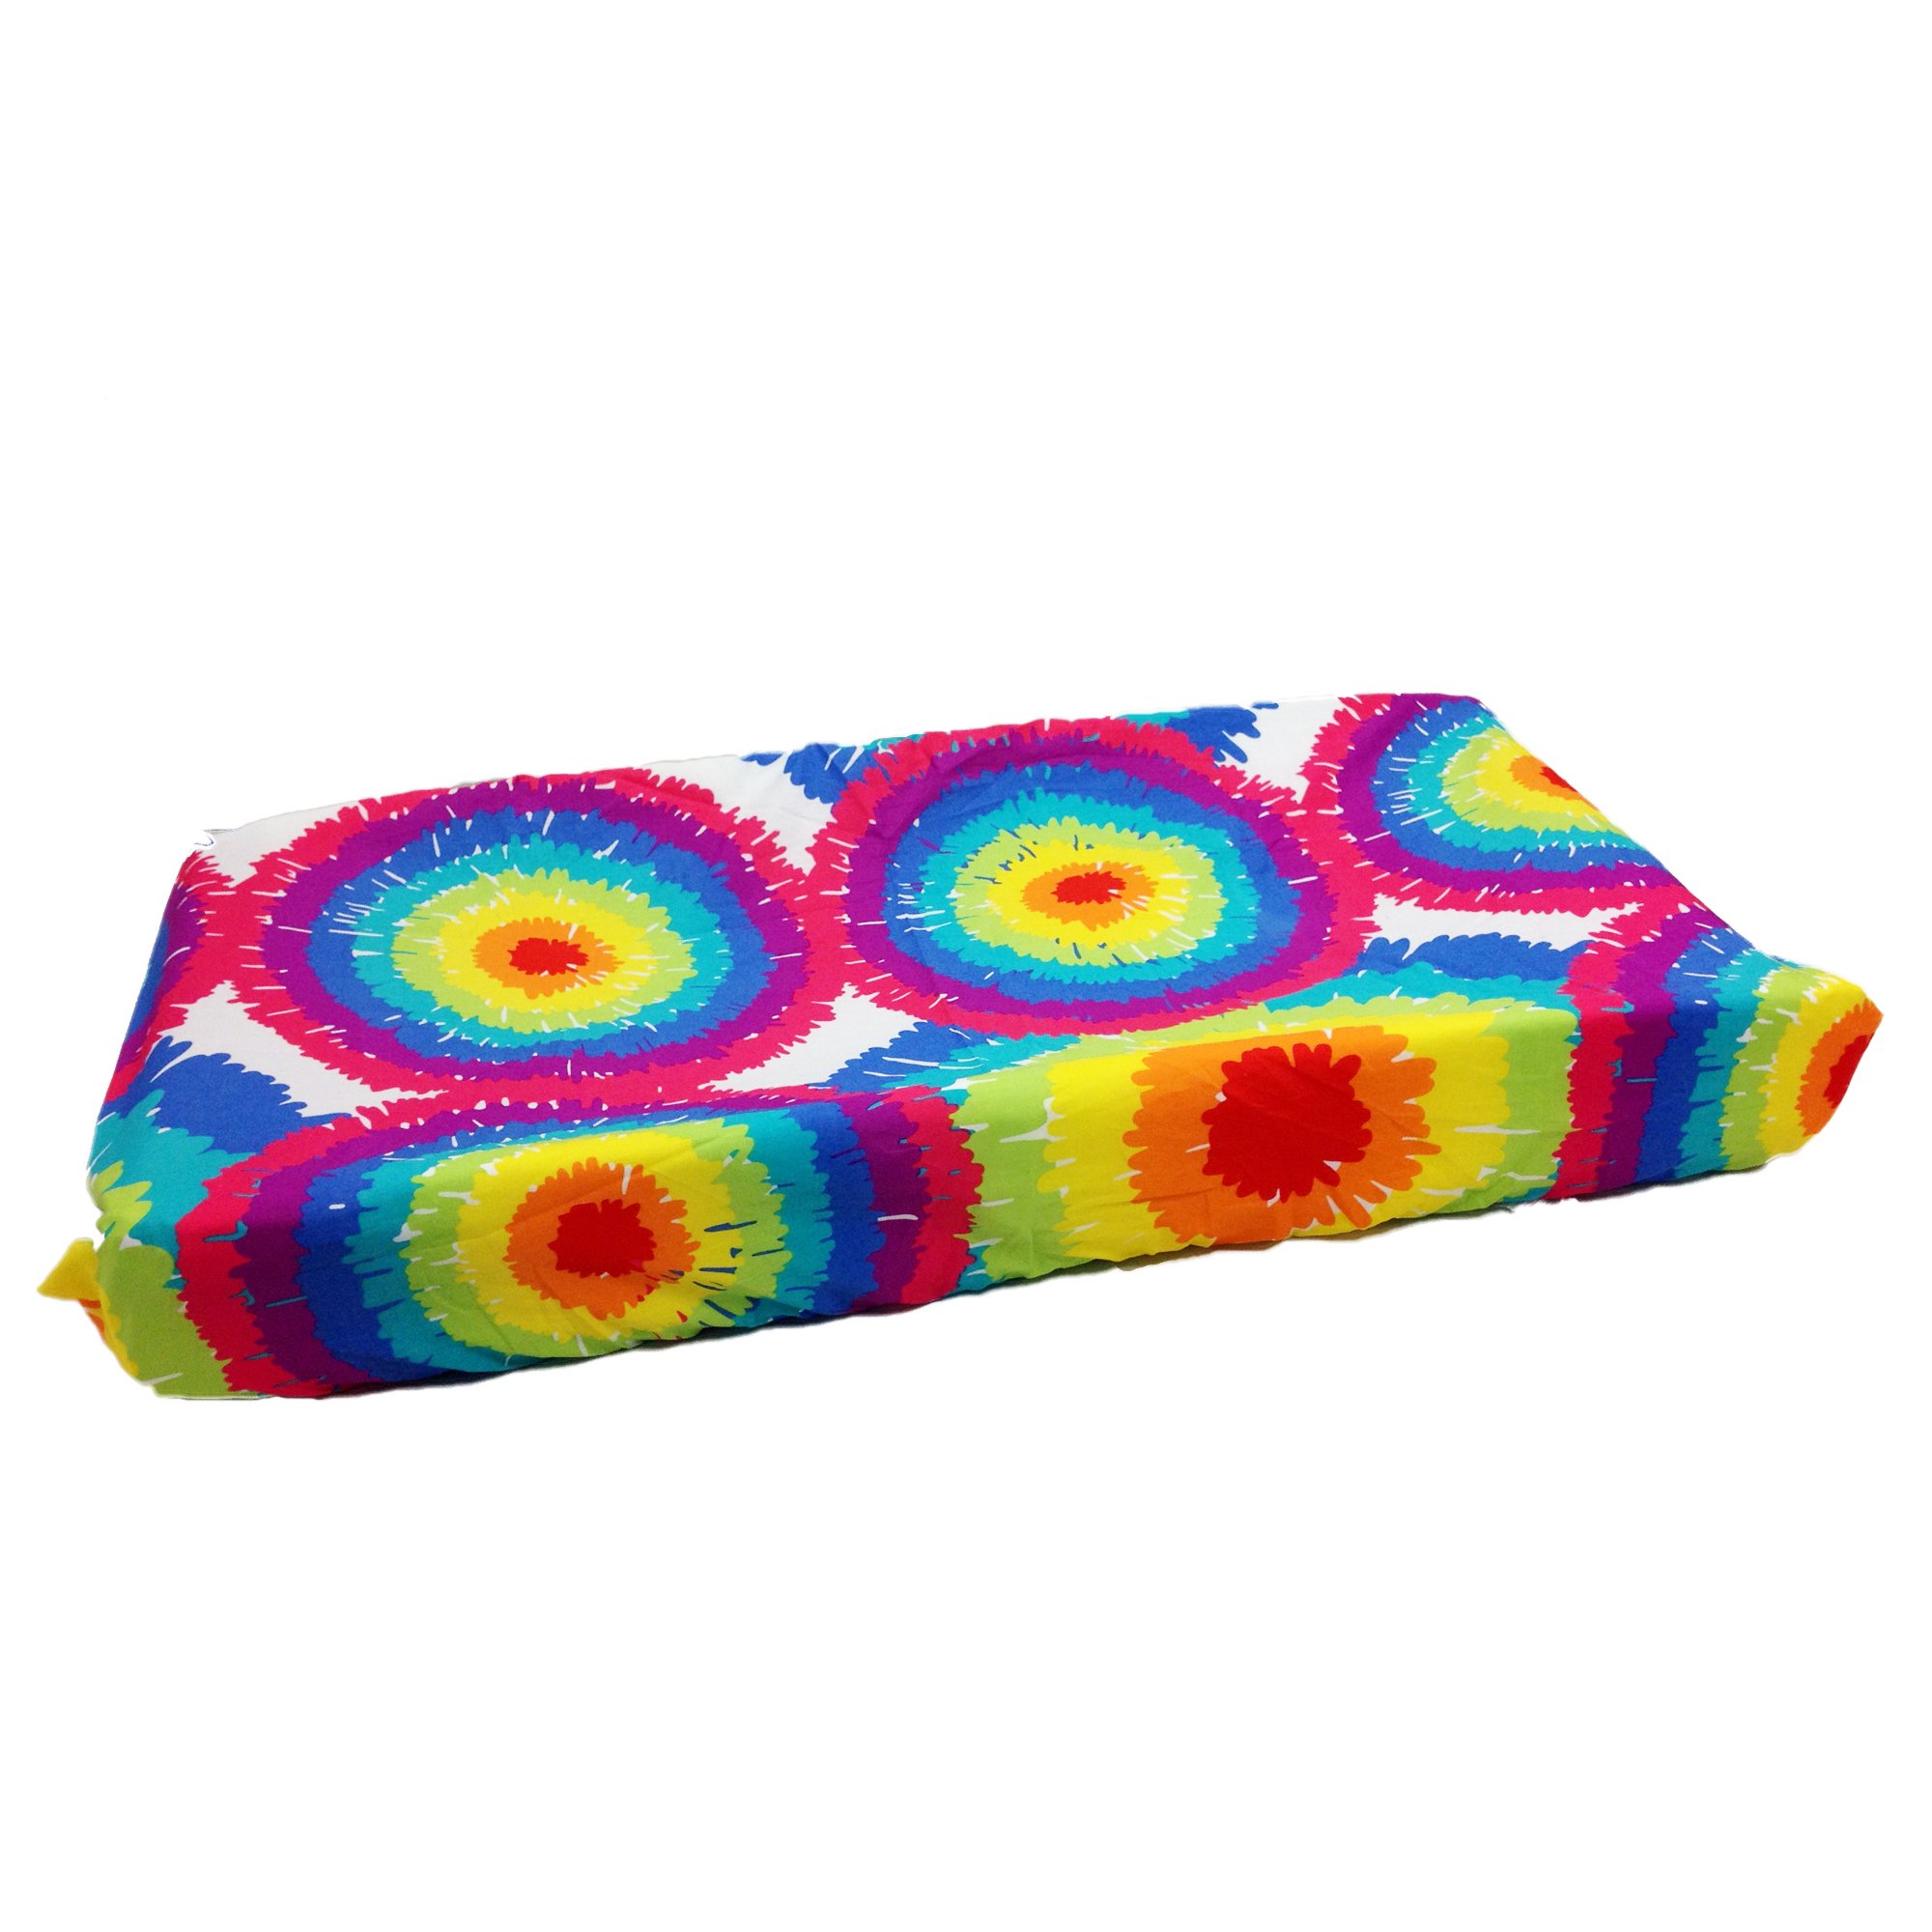 10-34035 Terrific Tie Dye Changing Pad Cover